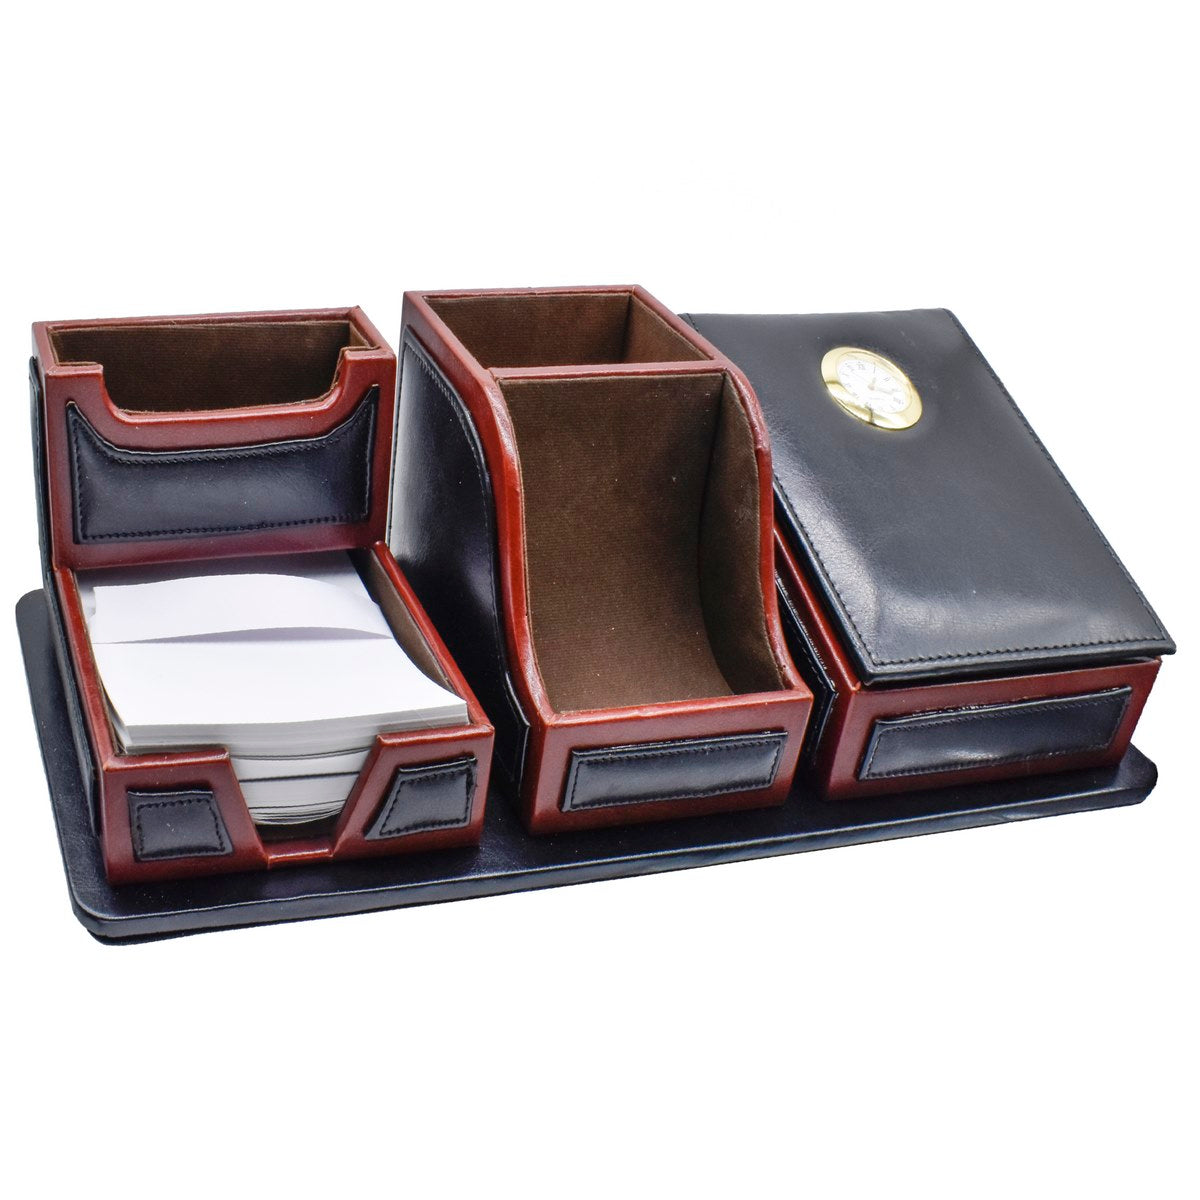 Dual Tone Multipurpose Premium Leather Table Stationery Organizer Combo Set with Clock - For Office Use, Personal Use, Corporate Gifting, Return Gift JAPF-9787BK